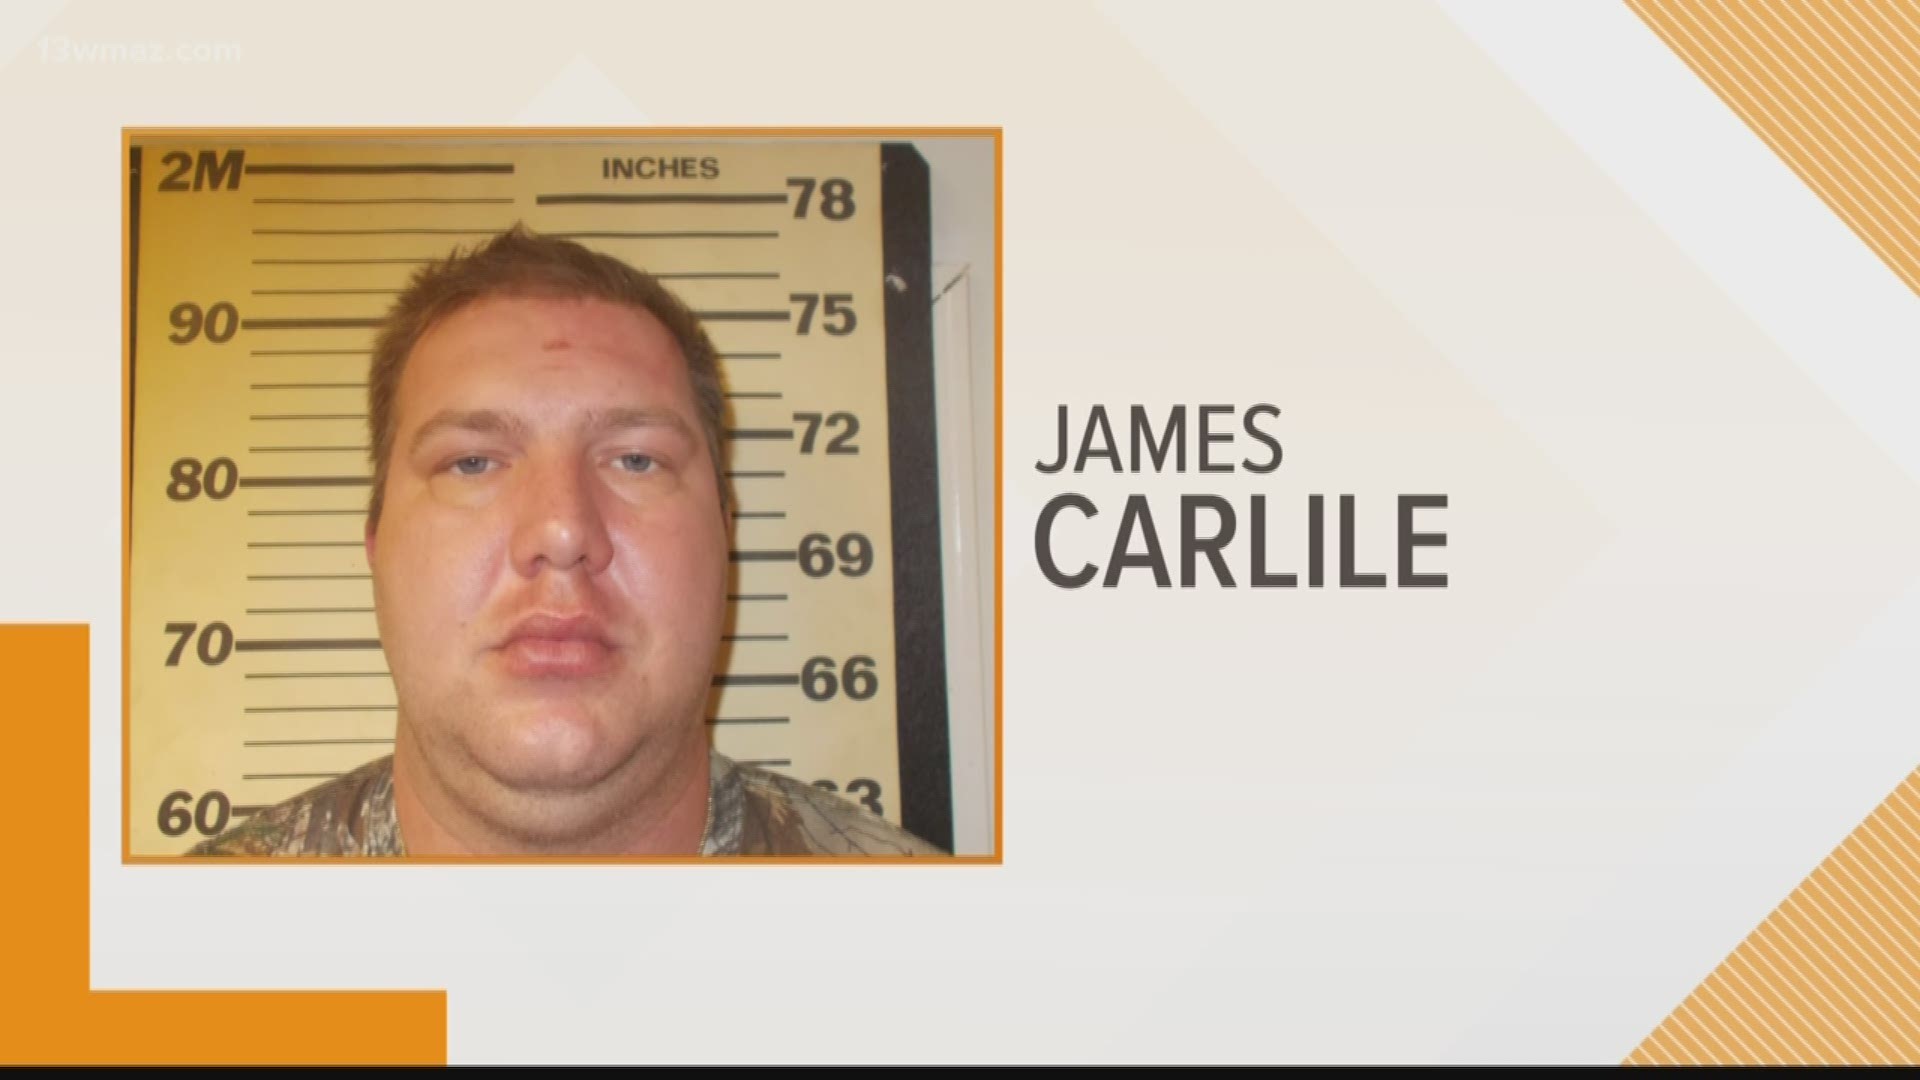 James Carlile was booked on two felony charges. Investigators say a narcotics sting led to his arrest.